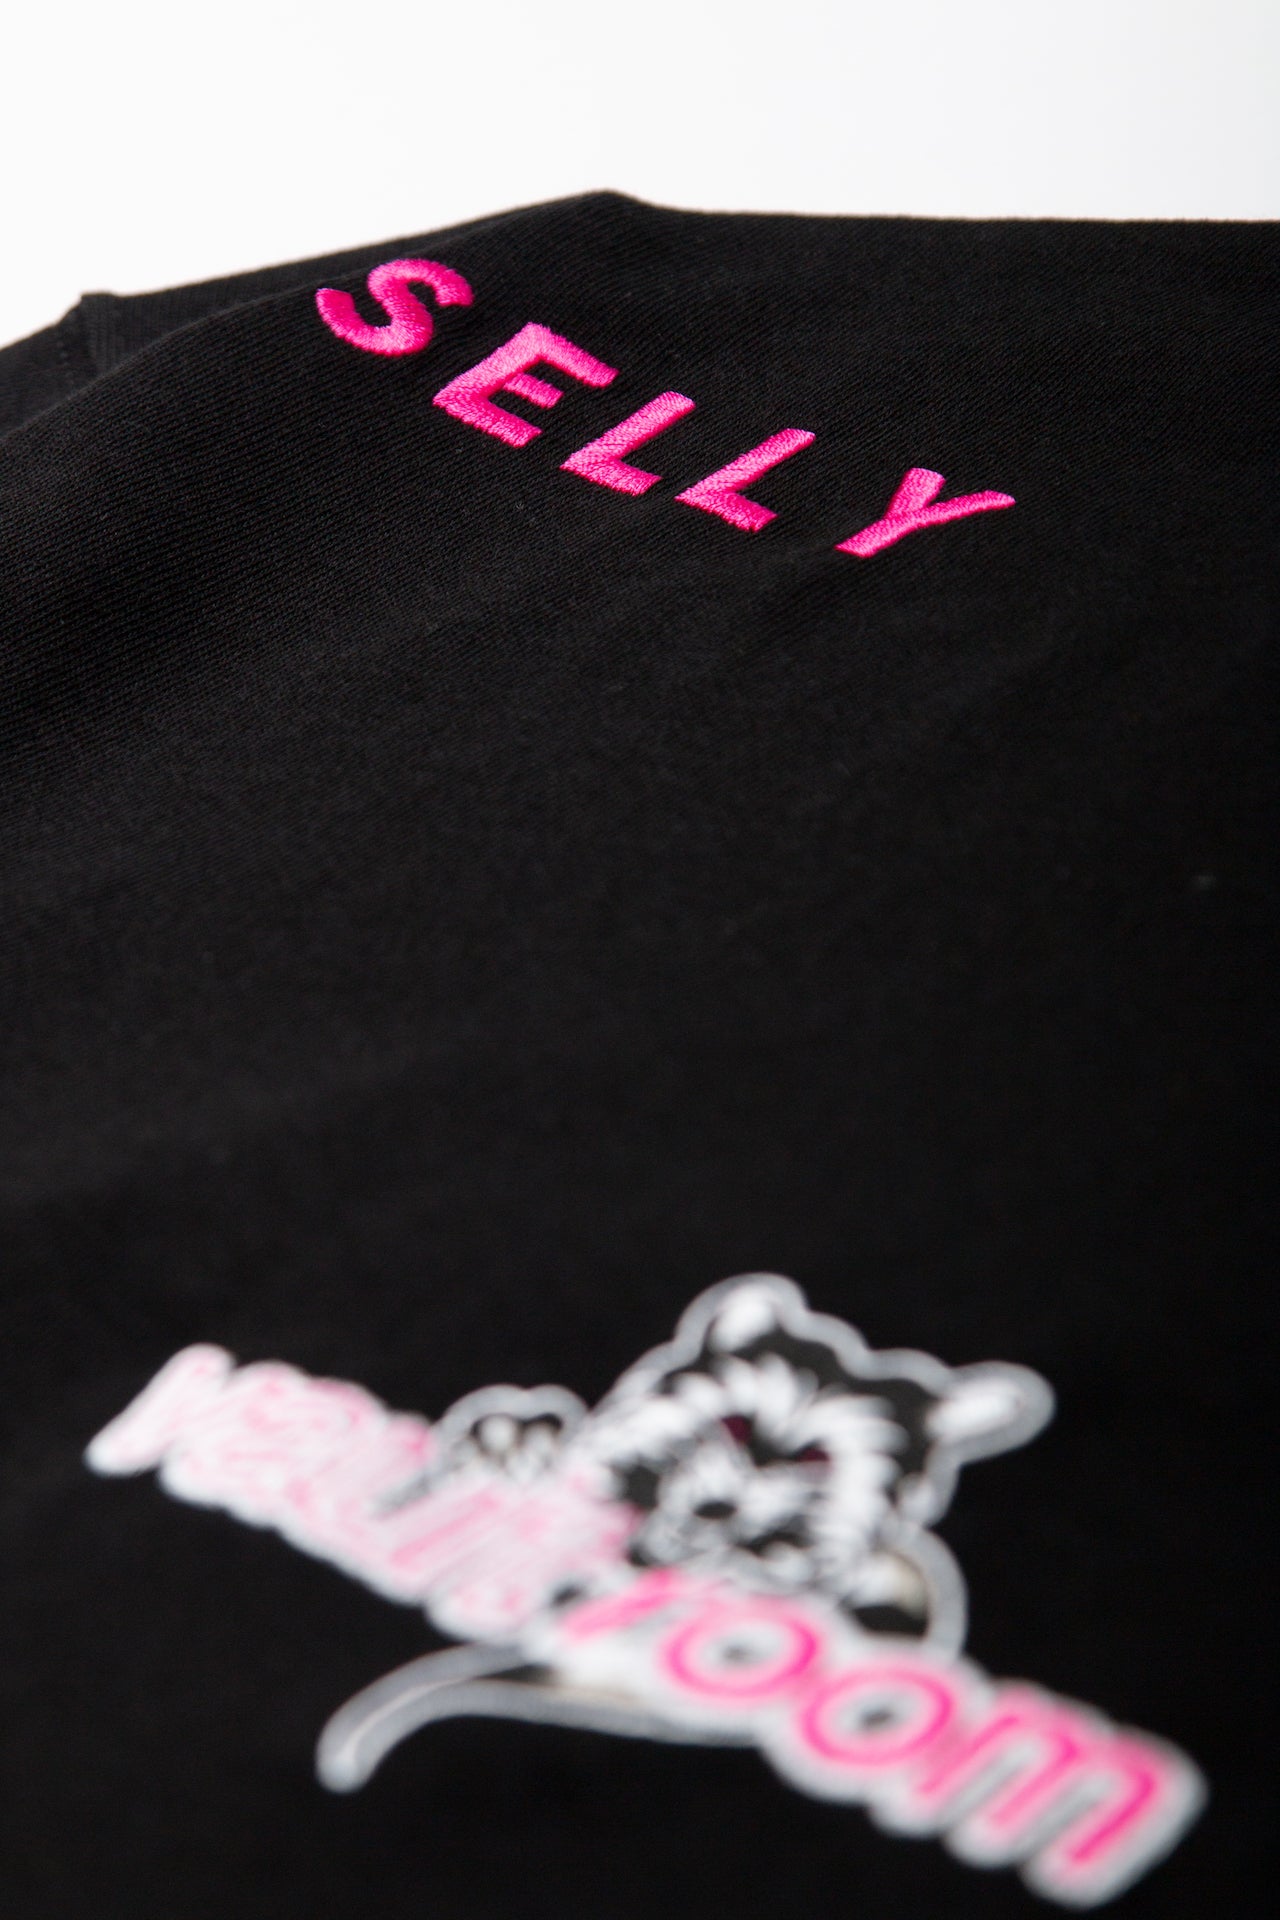 vaultroom × Selly / BLK Tシャツcotton100%